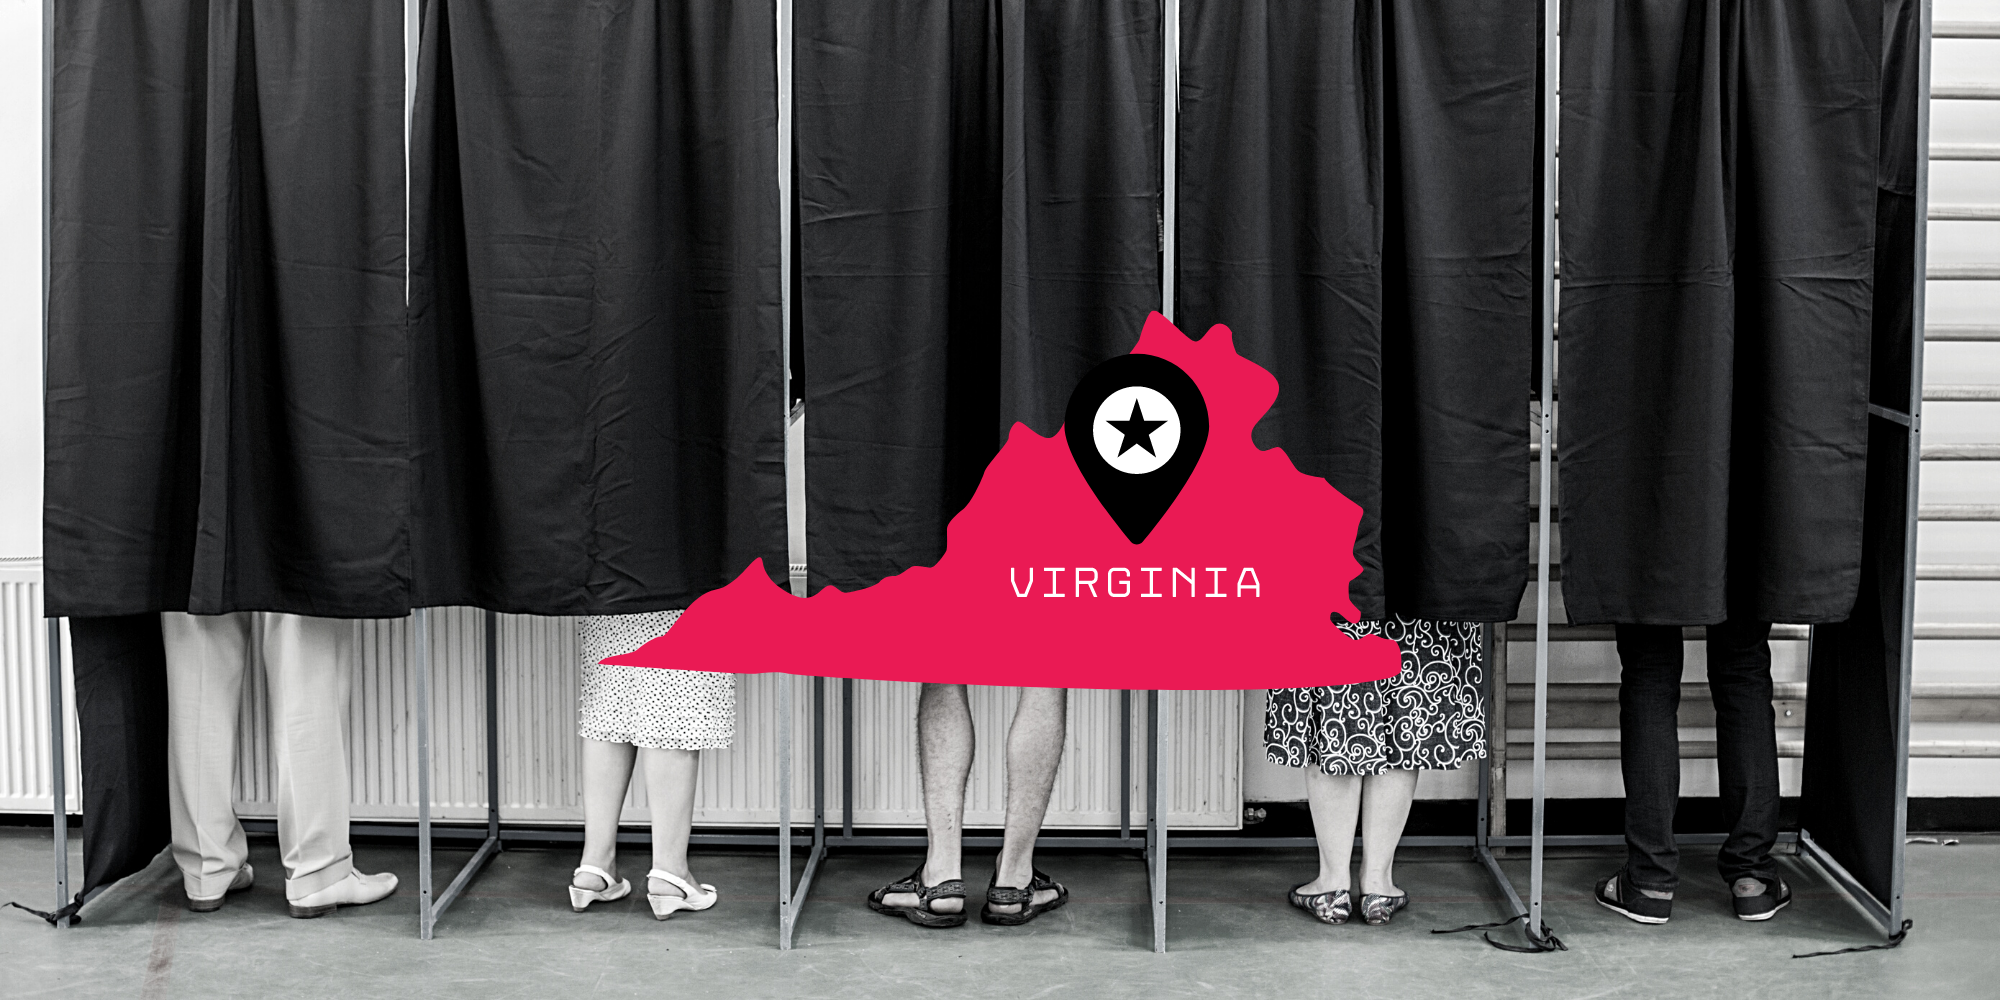 Why’s it so hard to vote in Virginia?